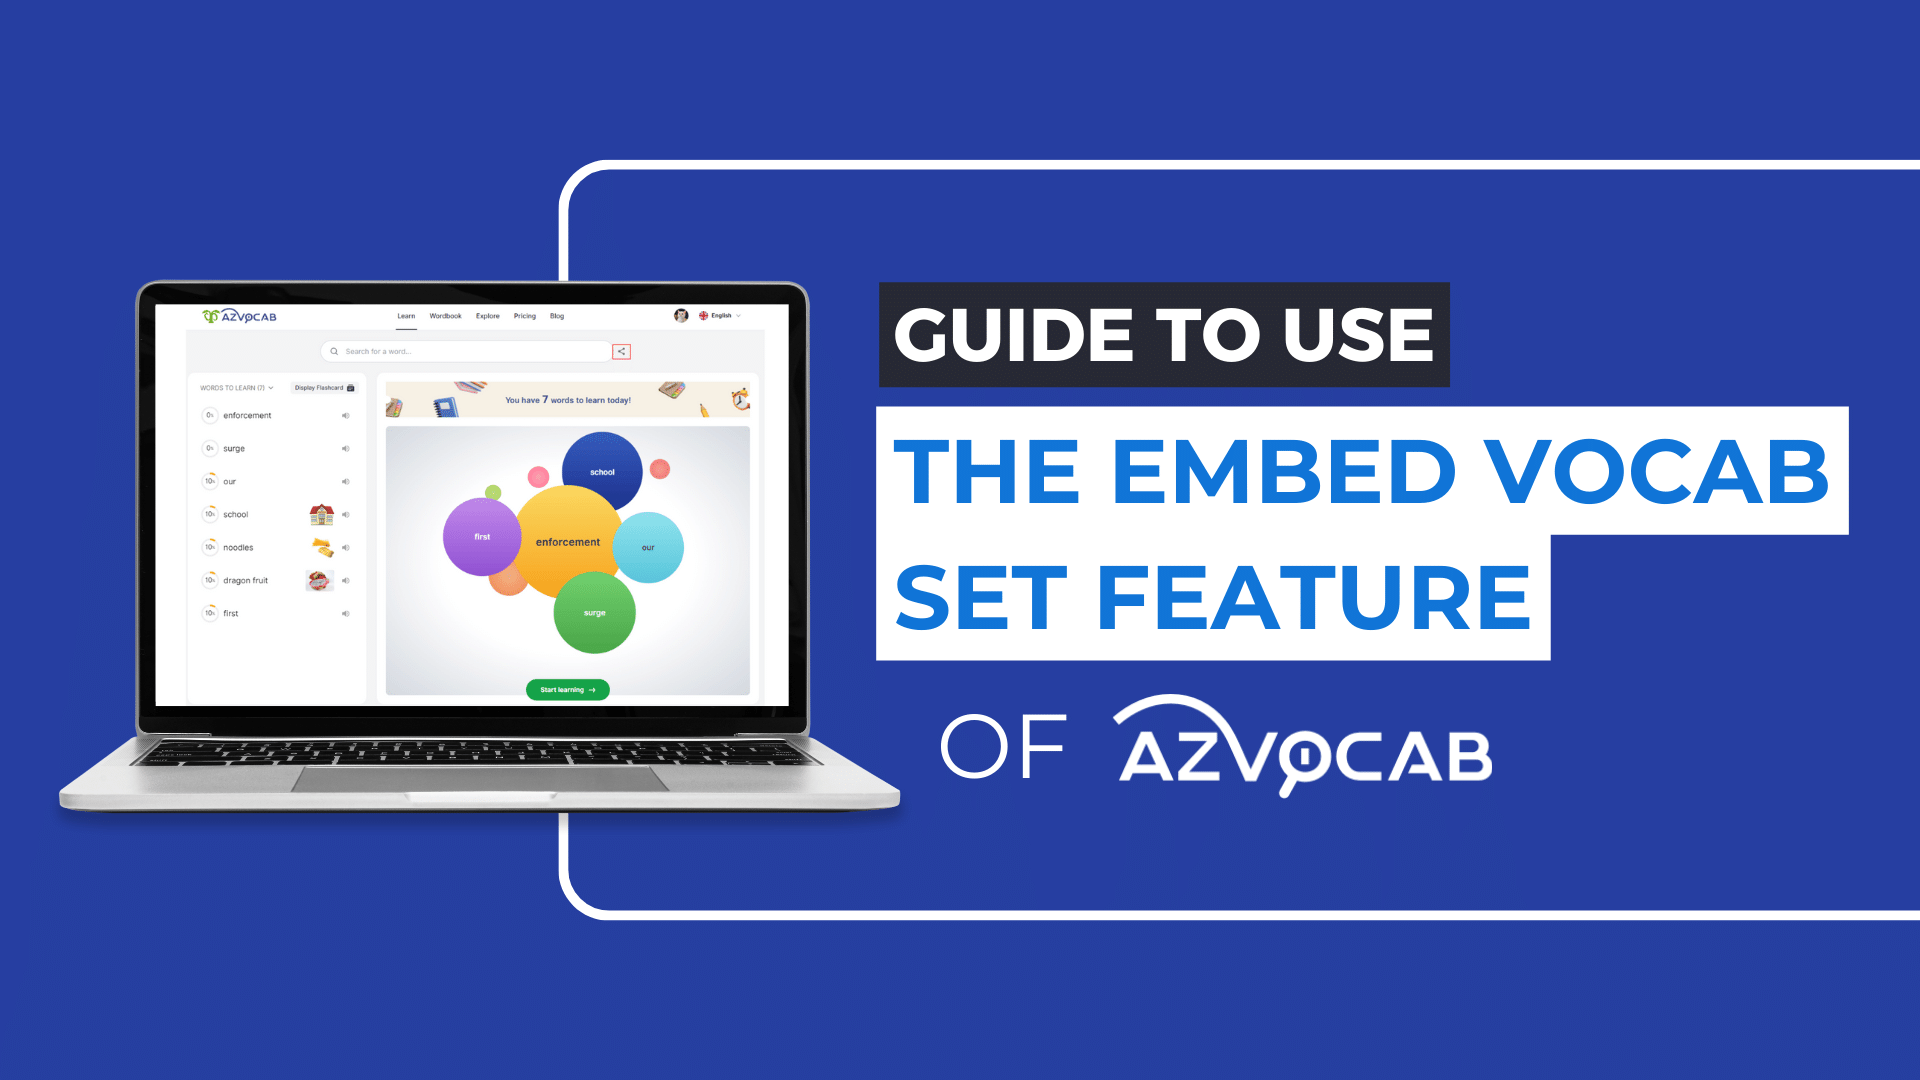 Guide to use The embed vocab set feature